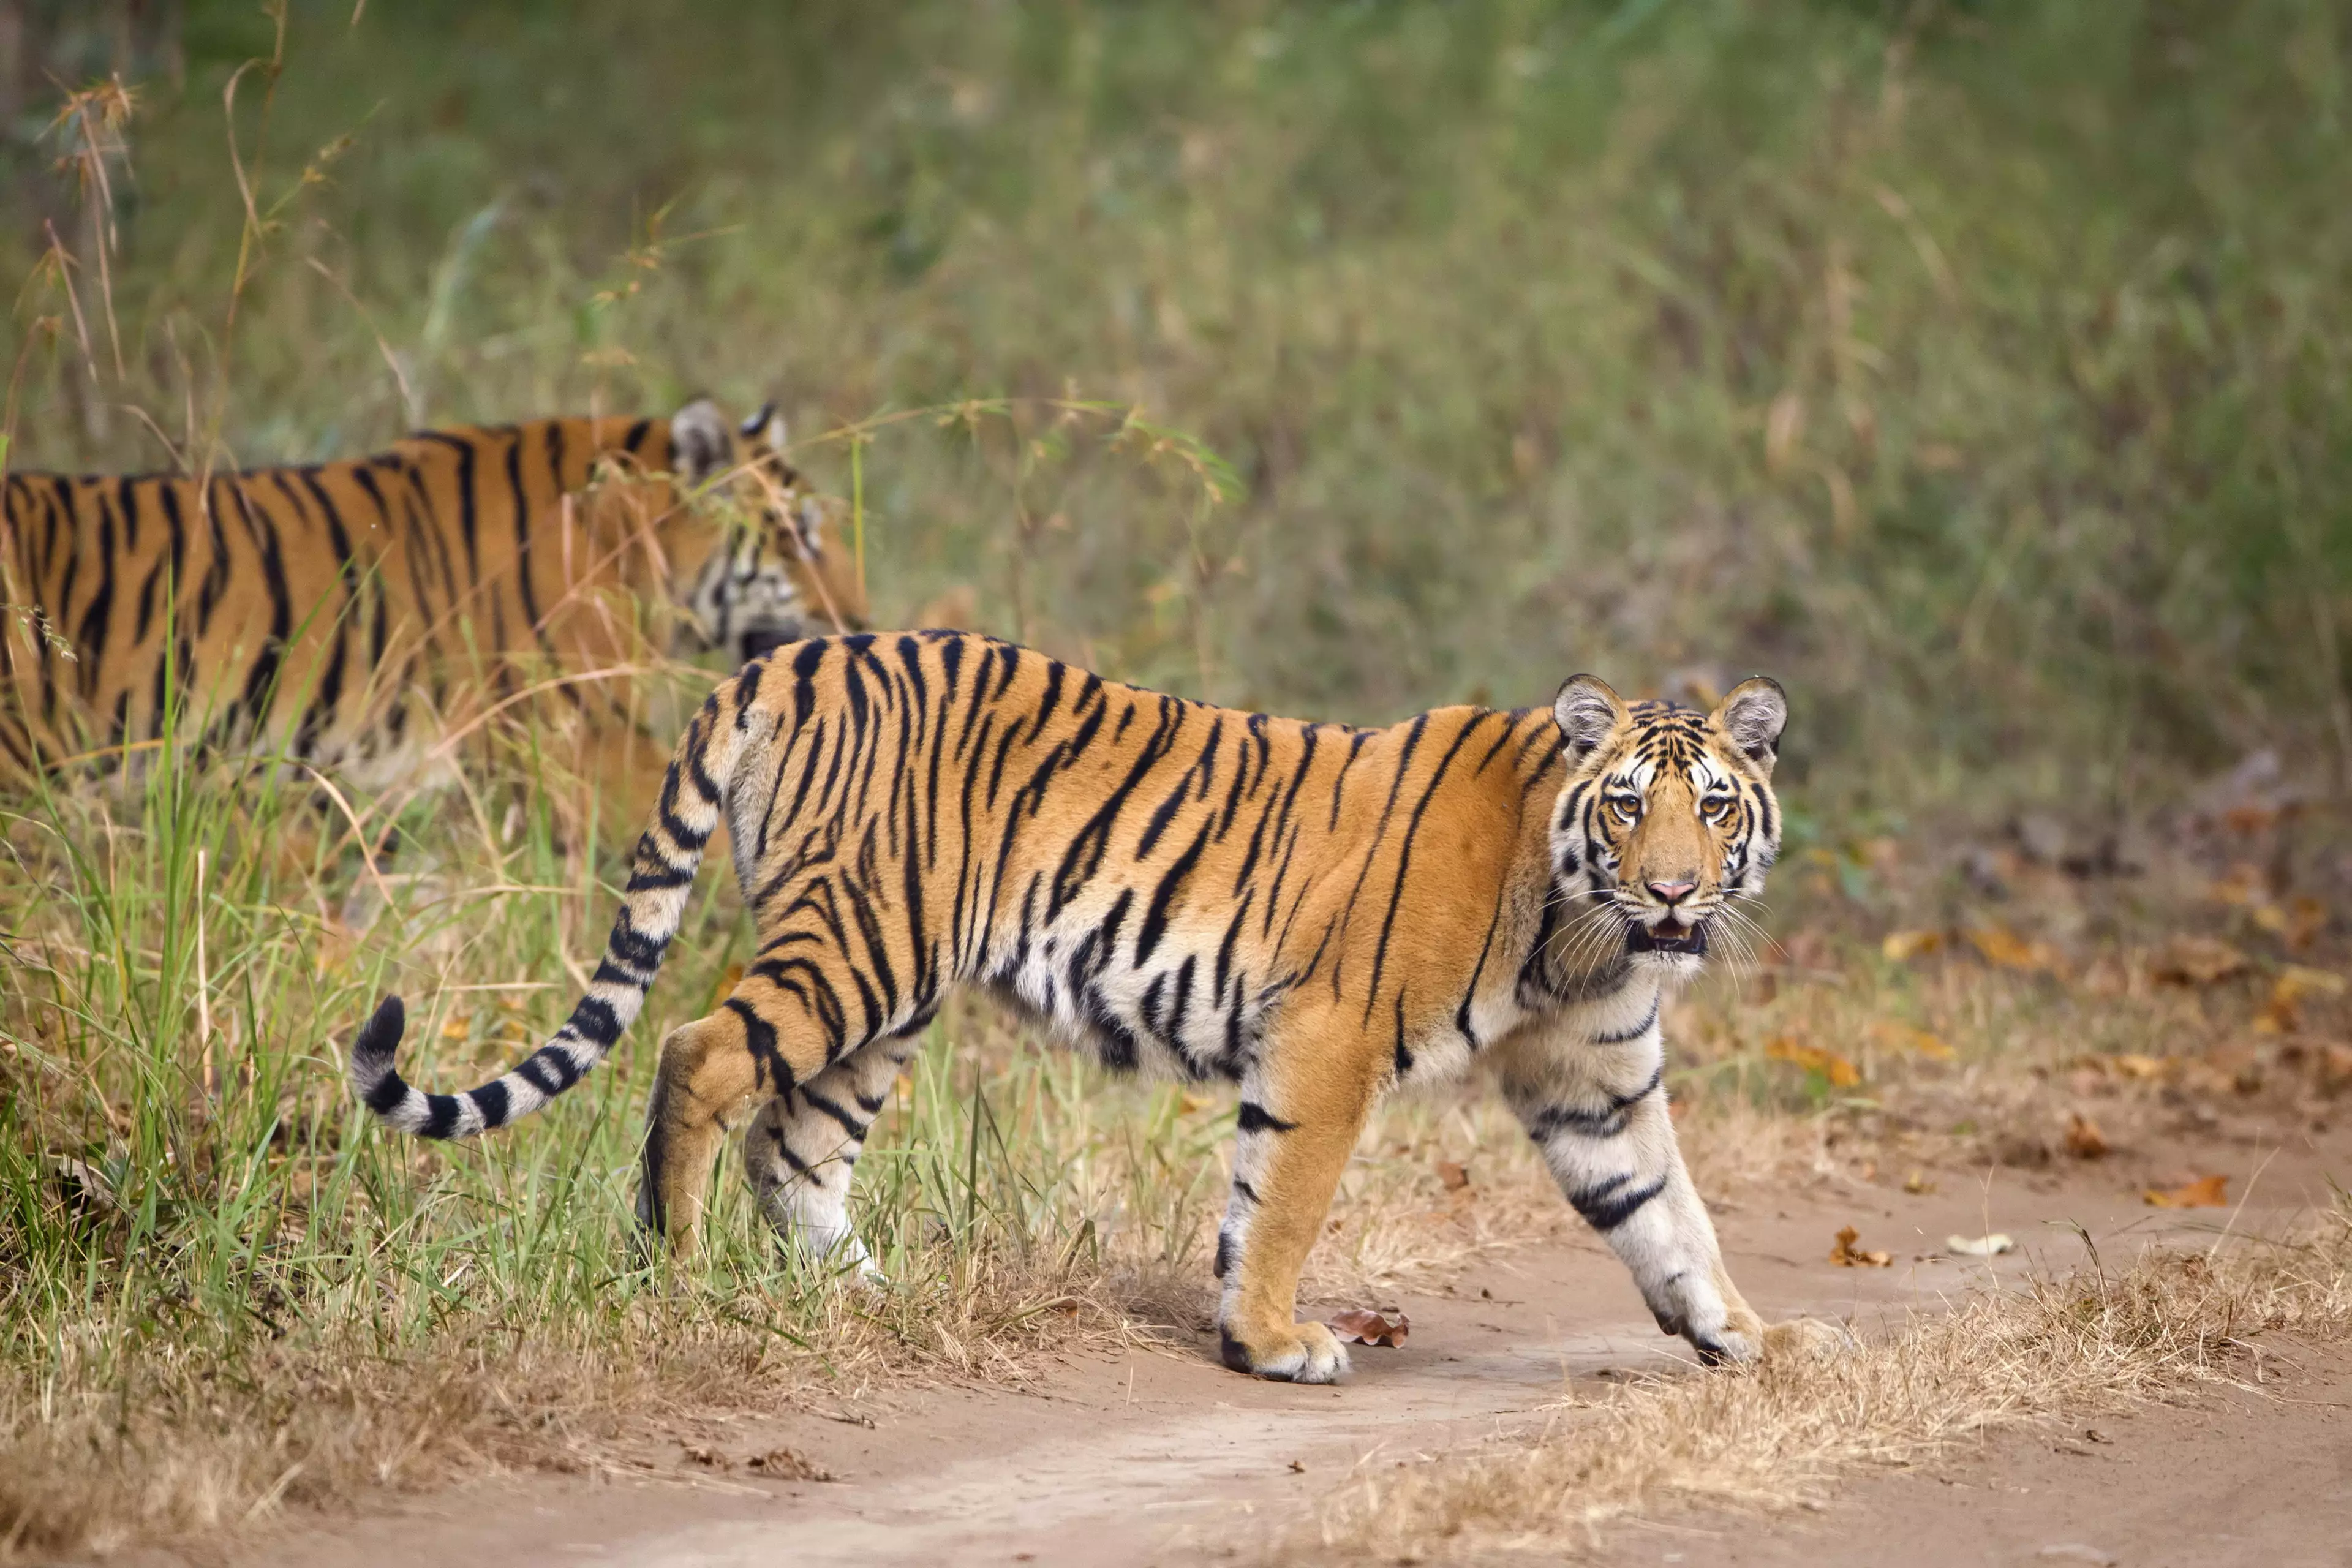 According to official figures, there are around 3,000 tigers living in the wild in India.